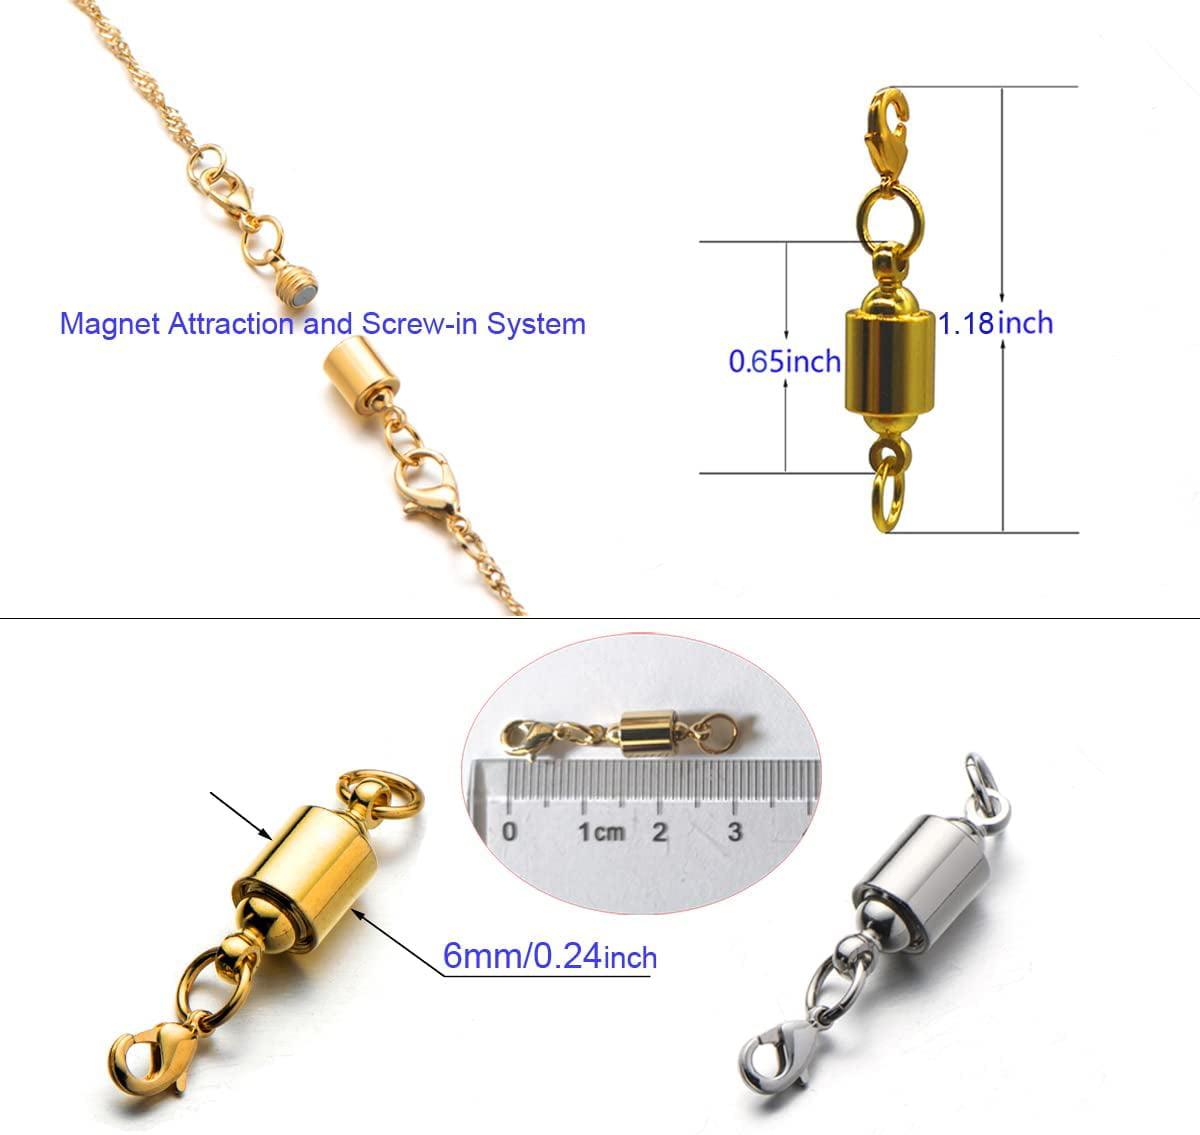 Screw Locking Magnetic Jewelry Clasps For Necklaces And Bracelets Easy On  Open Necklaces 6mm Light And Small Keep The Clasp In Back 8pcs Gold